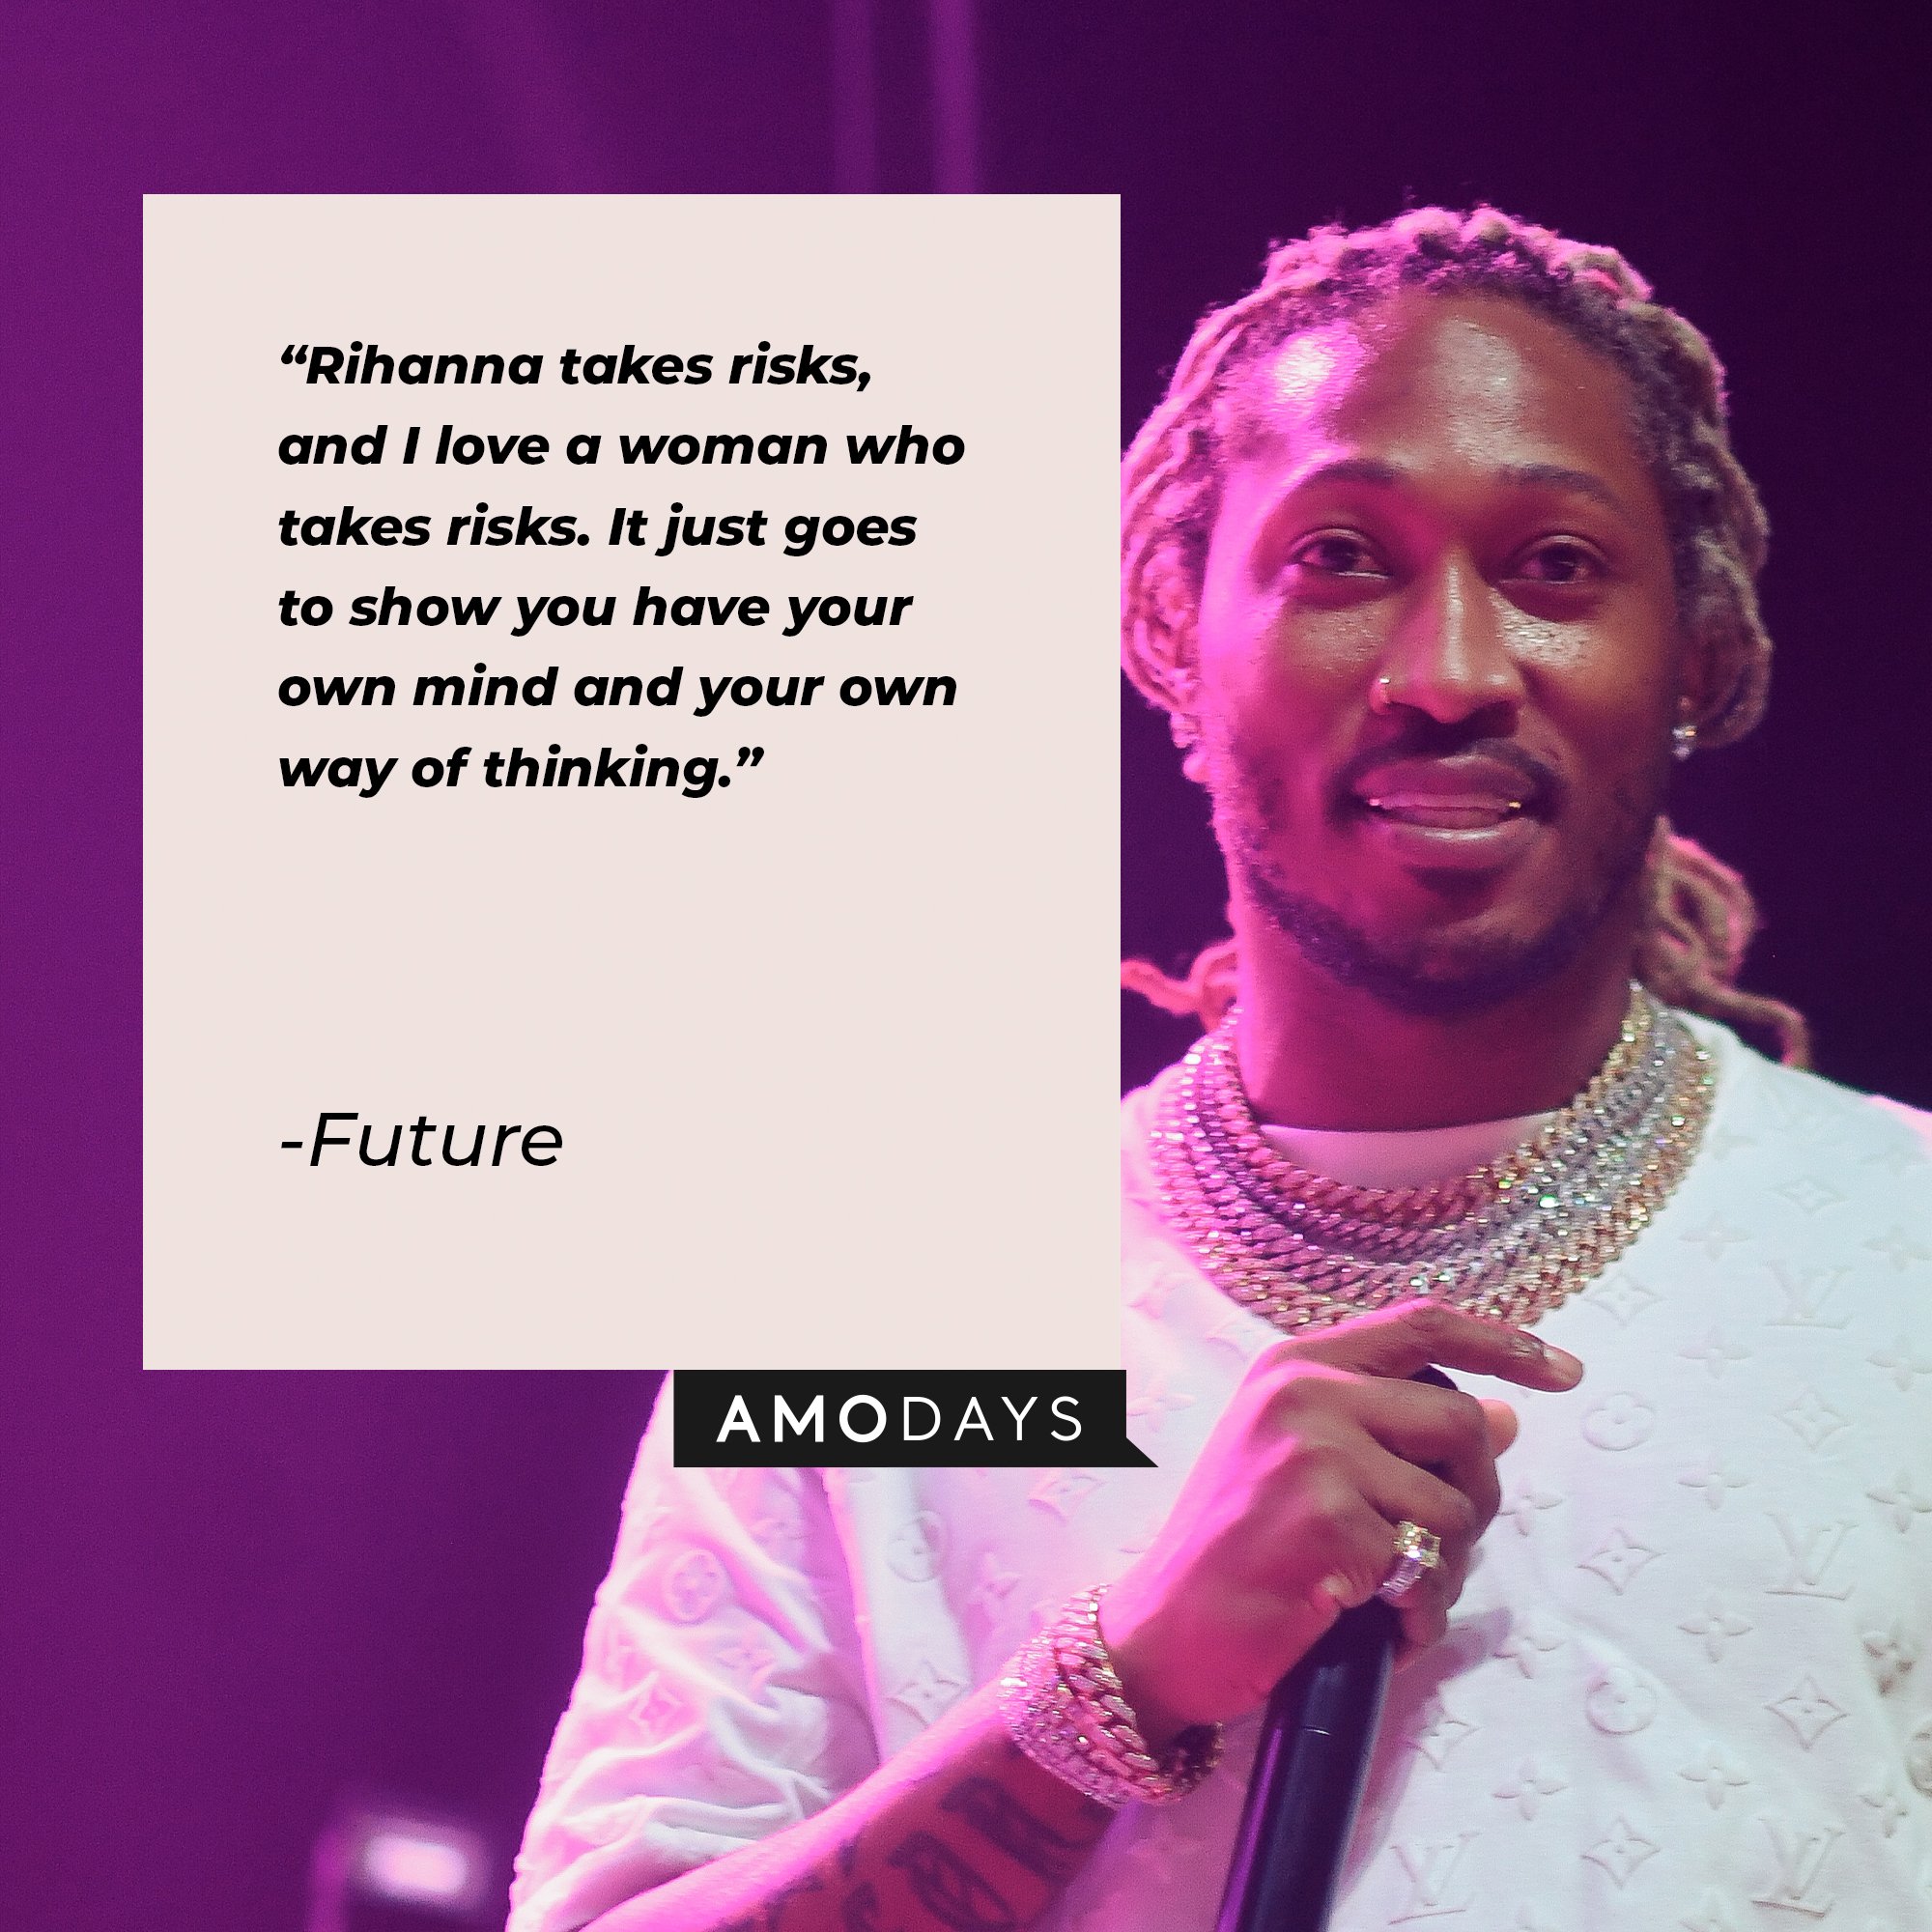 Future’s quote: "Rihanna takes risks, and I love a woman who takes risks. It just goes to show you have your own mind and your own way of thinking." | Image: AmoDays 